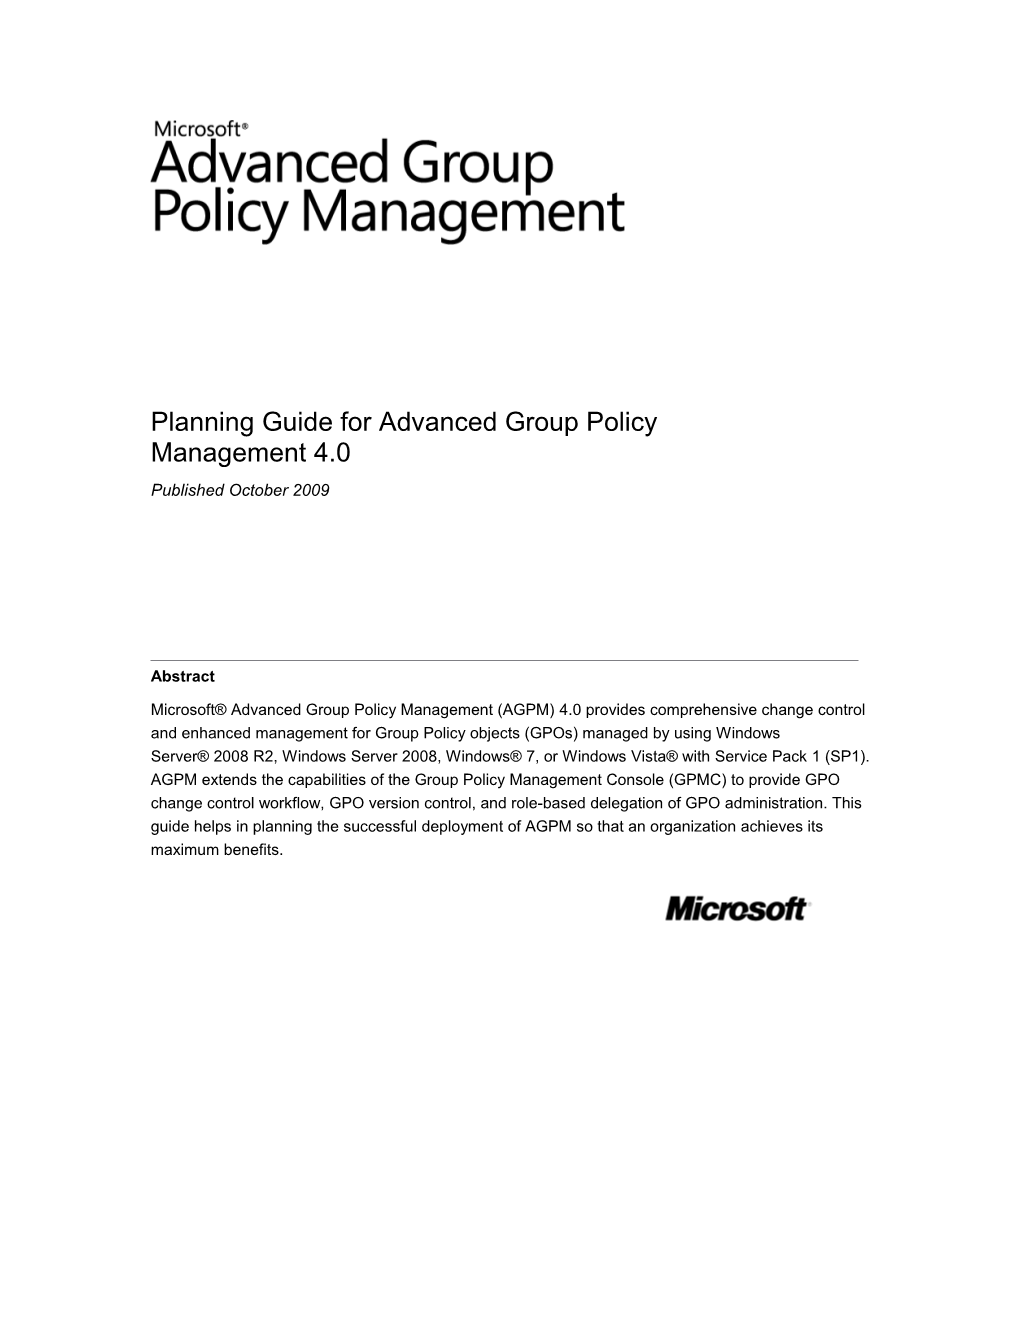 Planning Guide for Advanced Group Policy Management 4.0